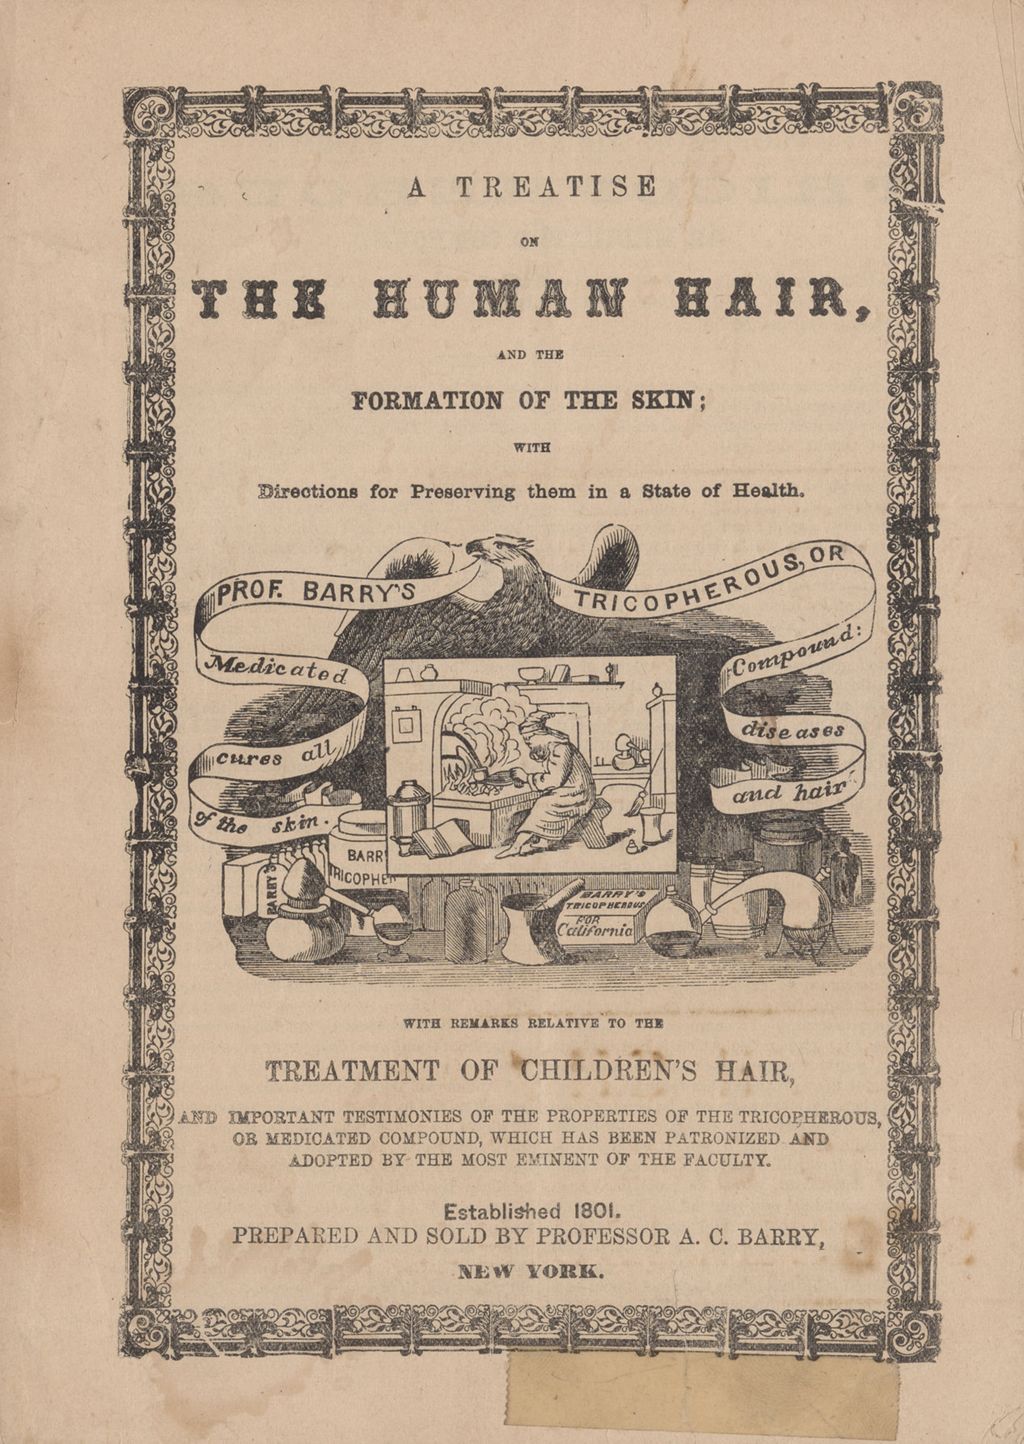 Miniature of “A treatise on the human hair...”